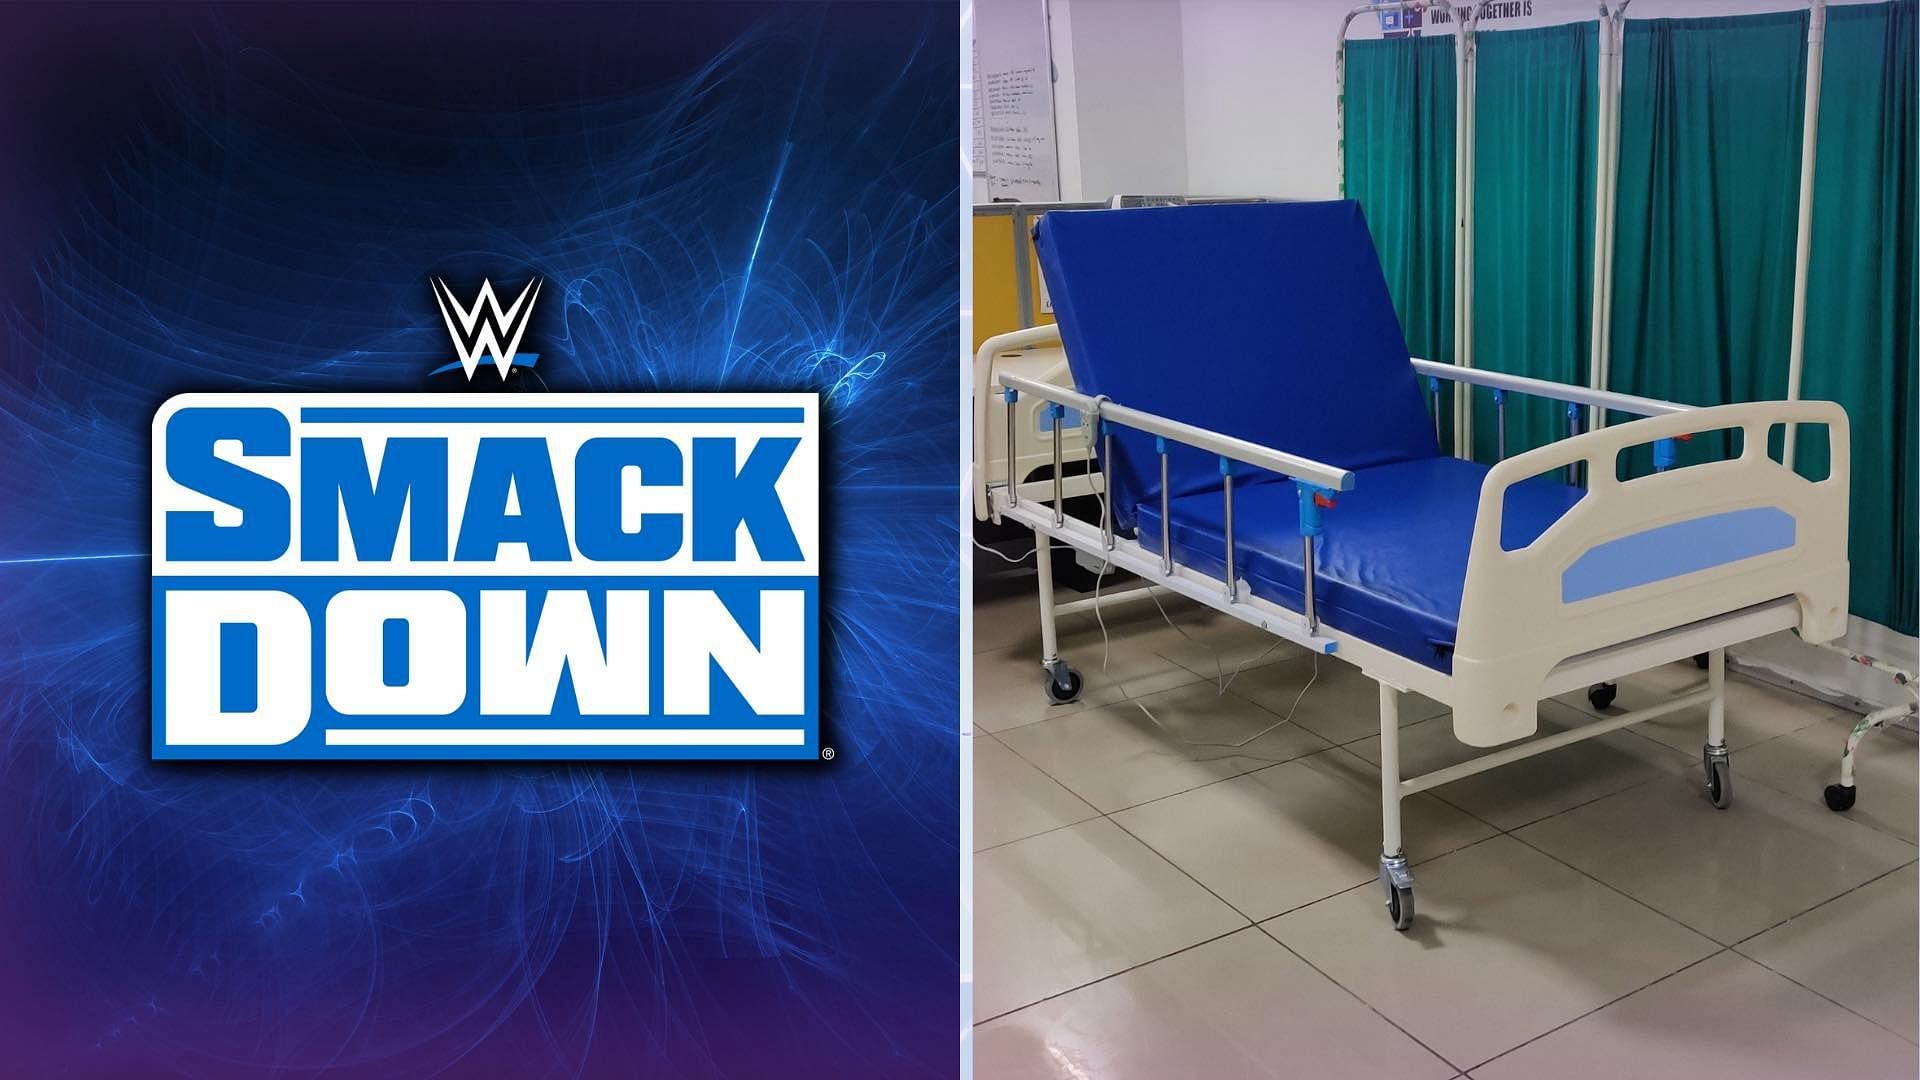 WWE SmackDown perhaps has a big match coming up 